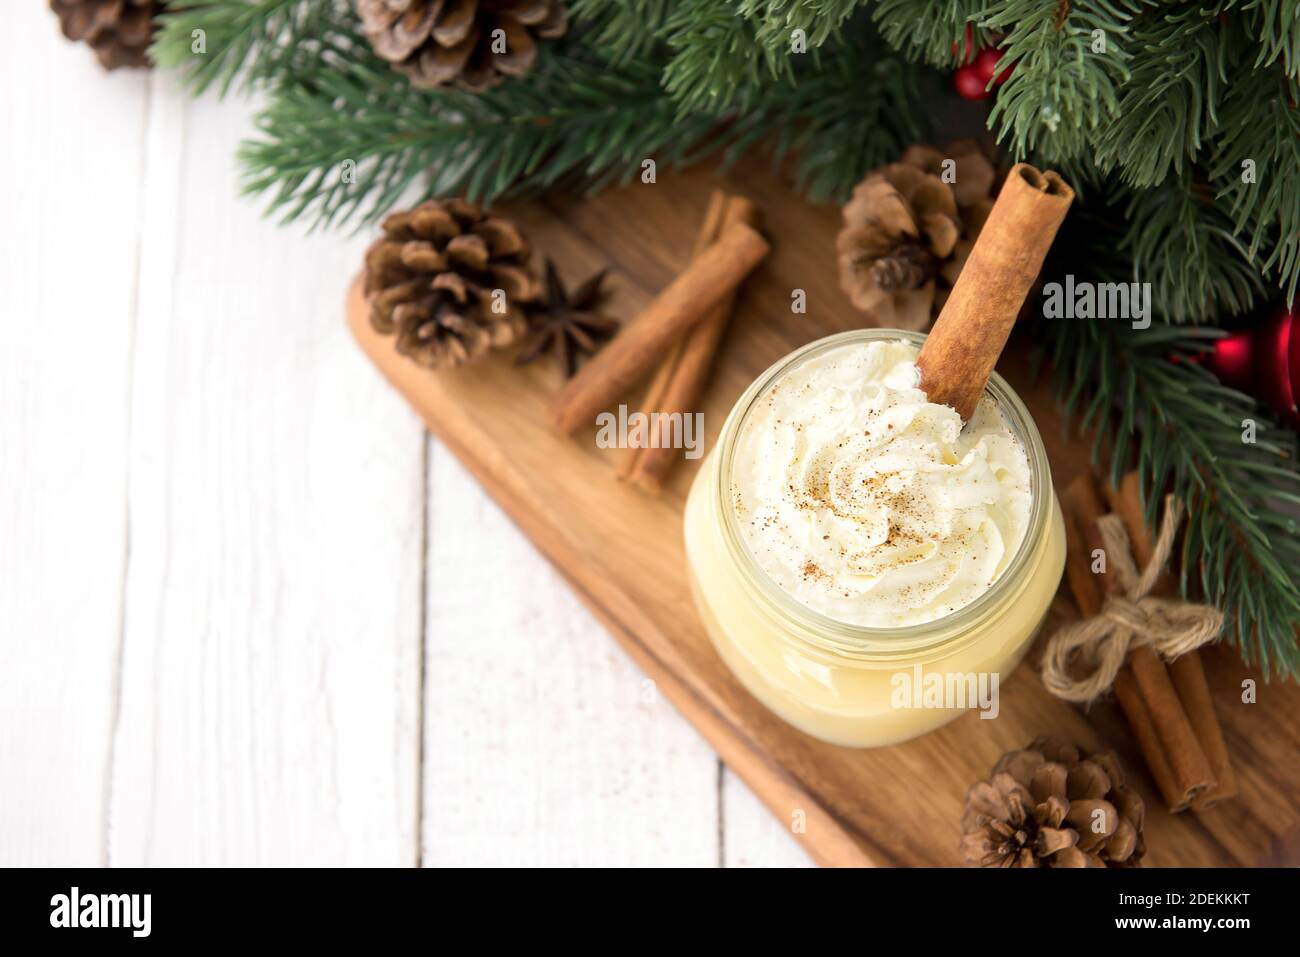 Traditional Christmas eggnog drink with whipped cream, ground nutmeg, cinnamon and decorating items on wood table, preparing for celebrating festive h Stock Photo